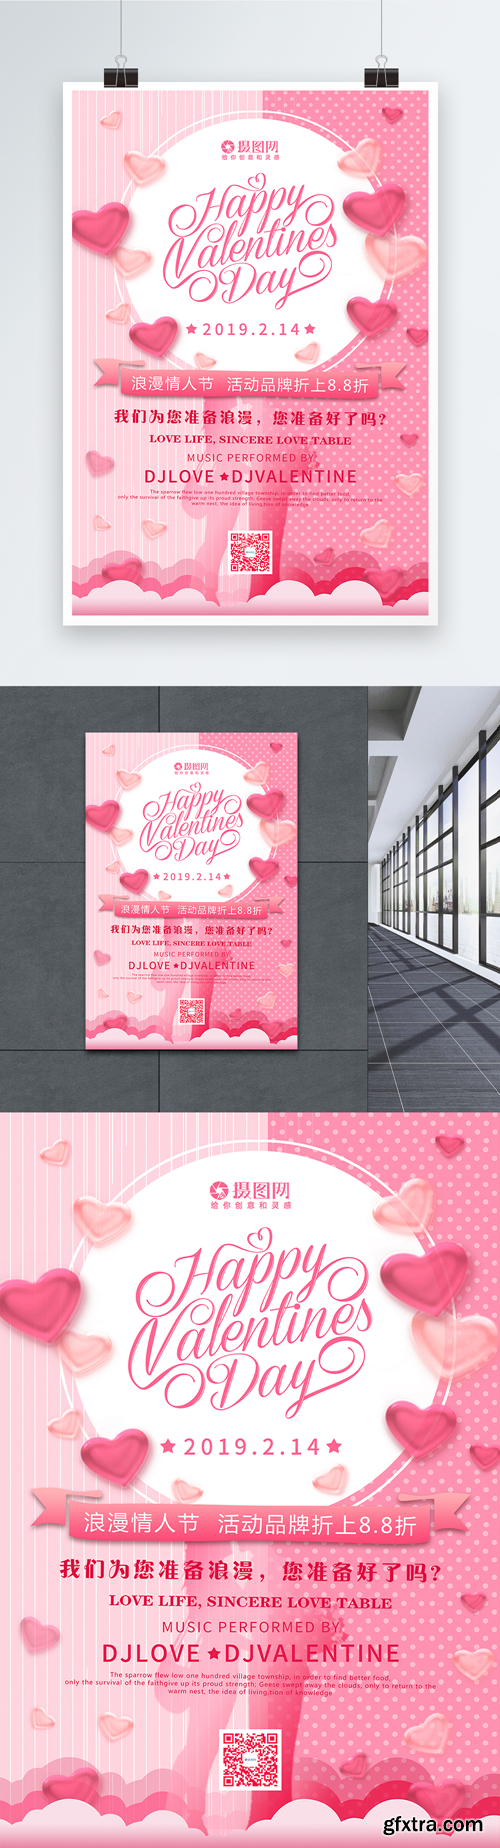 pink romantic valentines day valentines day festival poster desi